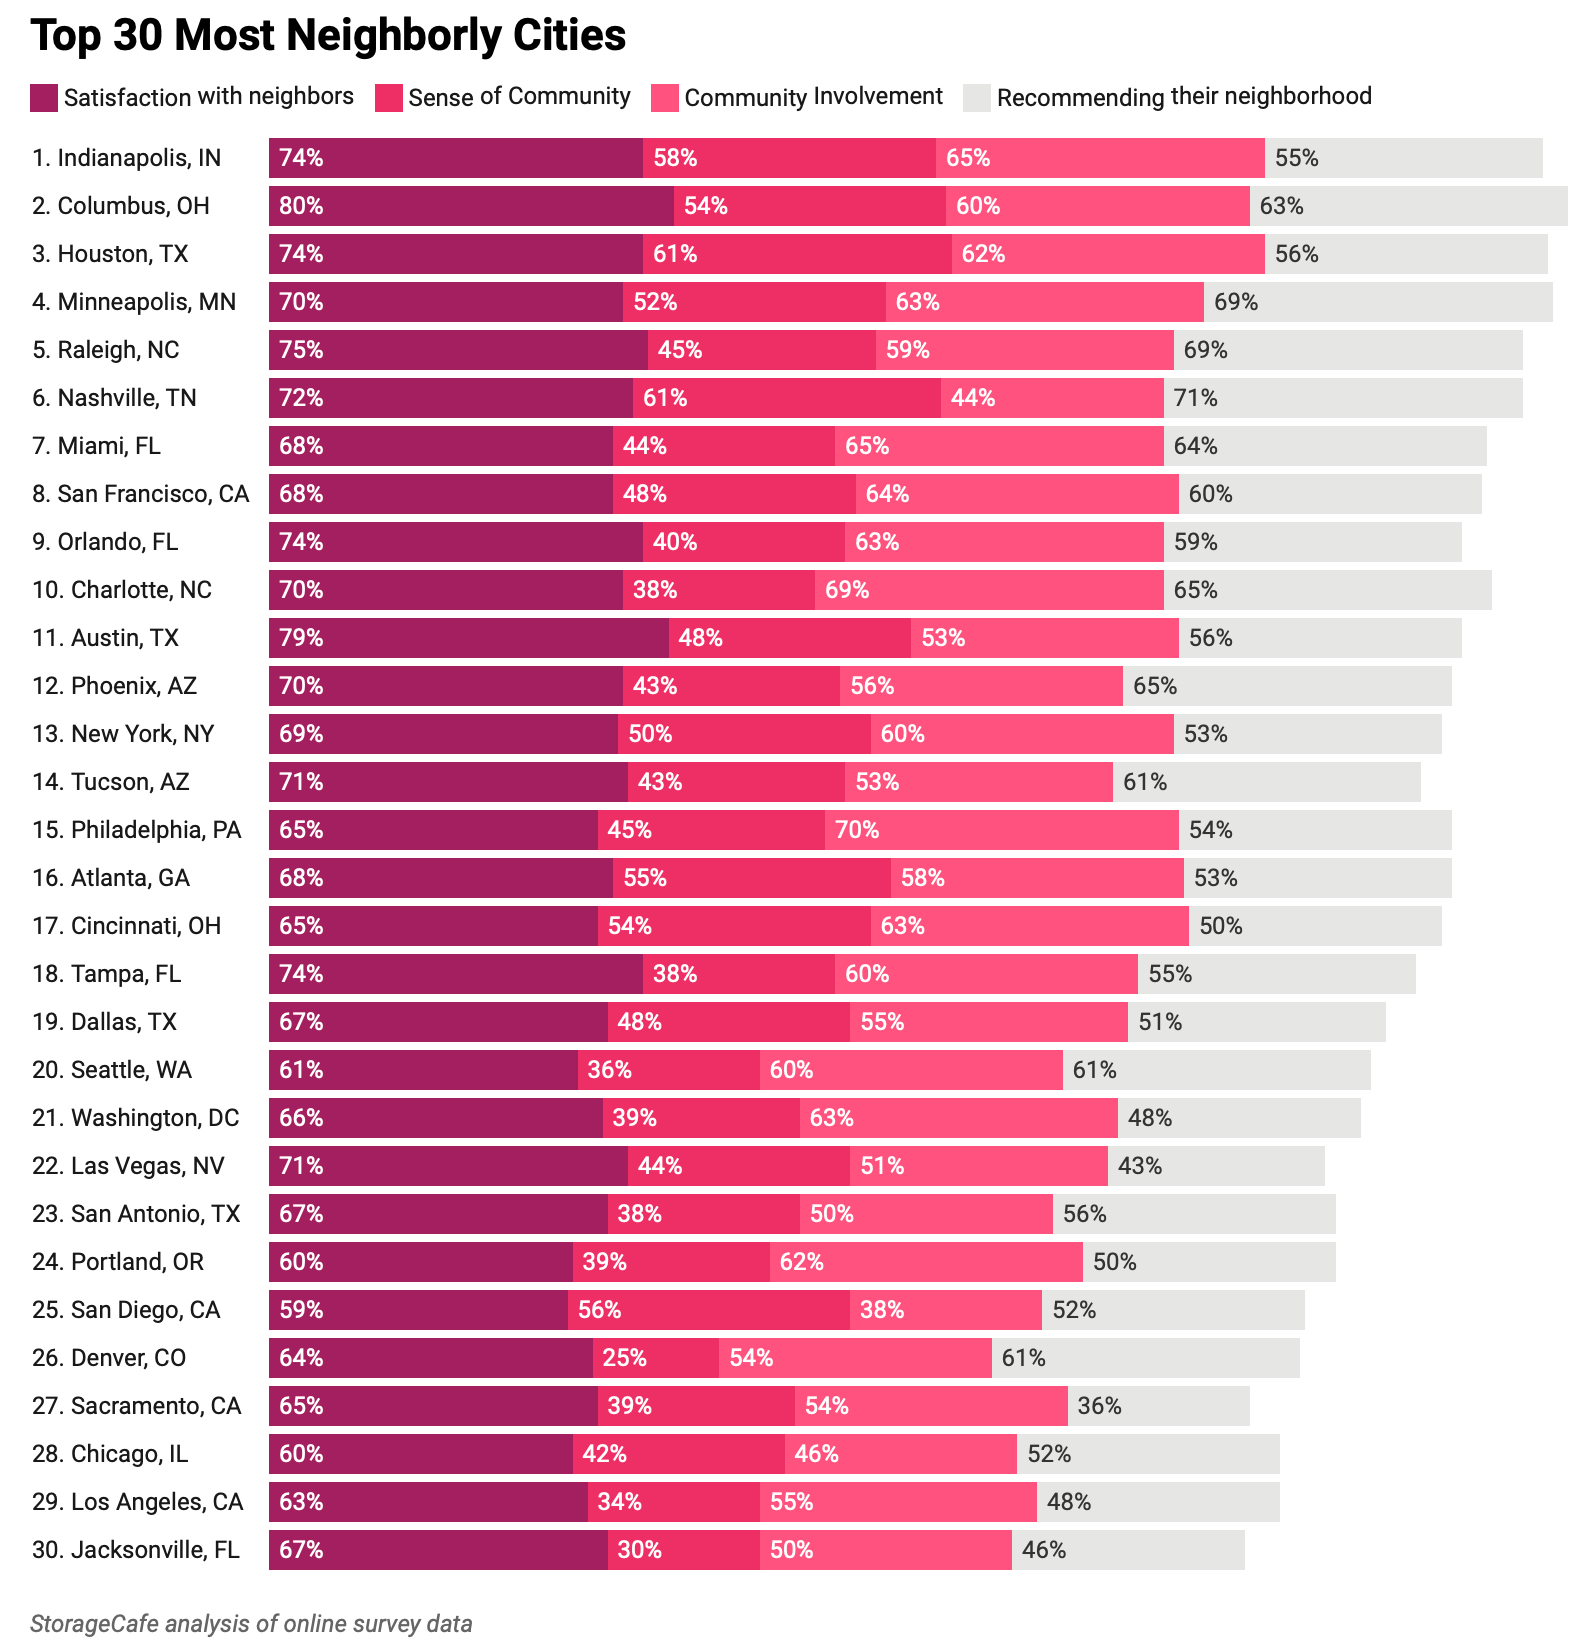 A bar chart showing the rankings of the most neighborly cities in the U.S. and what qualities they have.